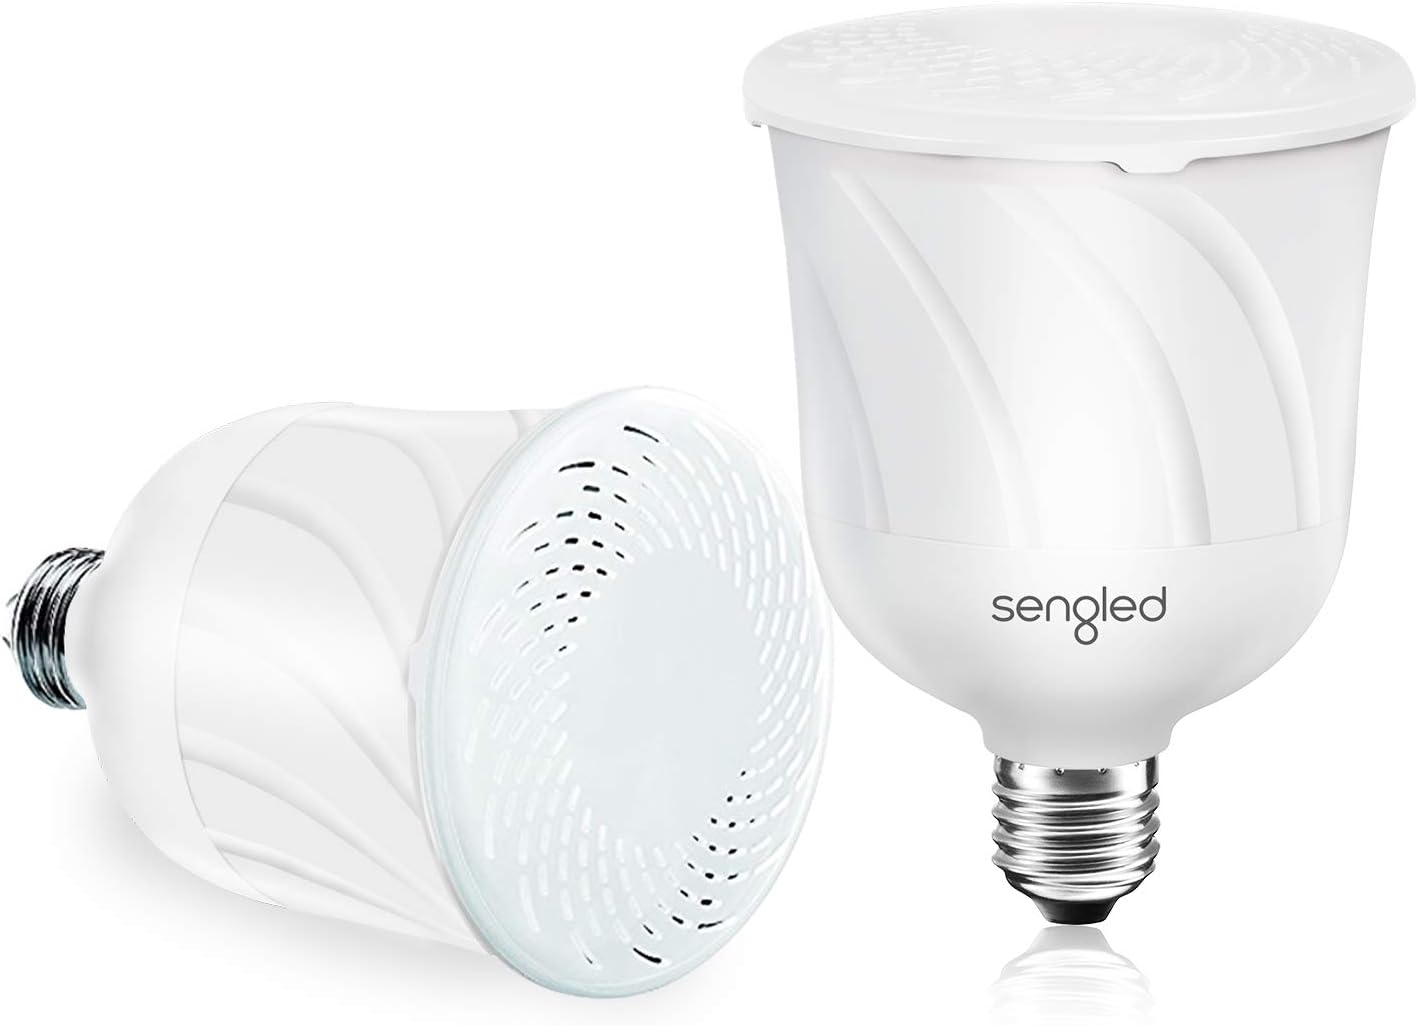 Sengled Pulse LED Smart Bulb with JBL Bluetooth Speaker – A Review of Brilliant Sound and Illumination